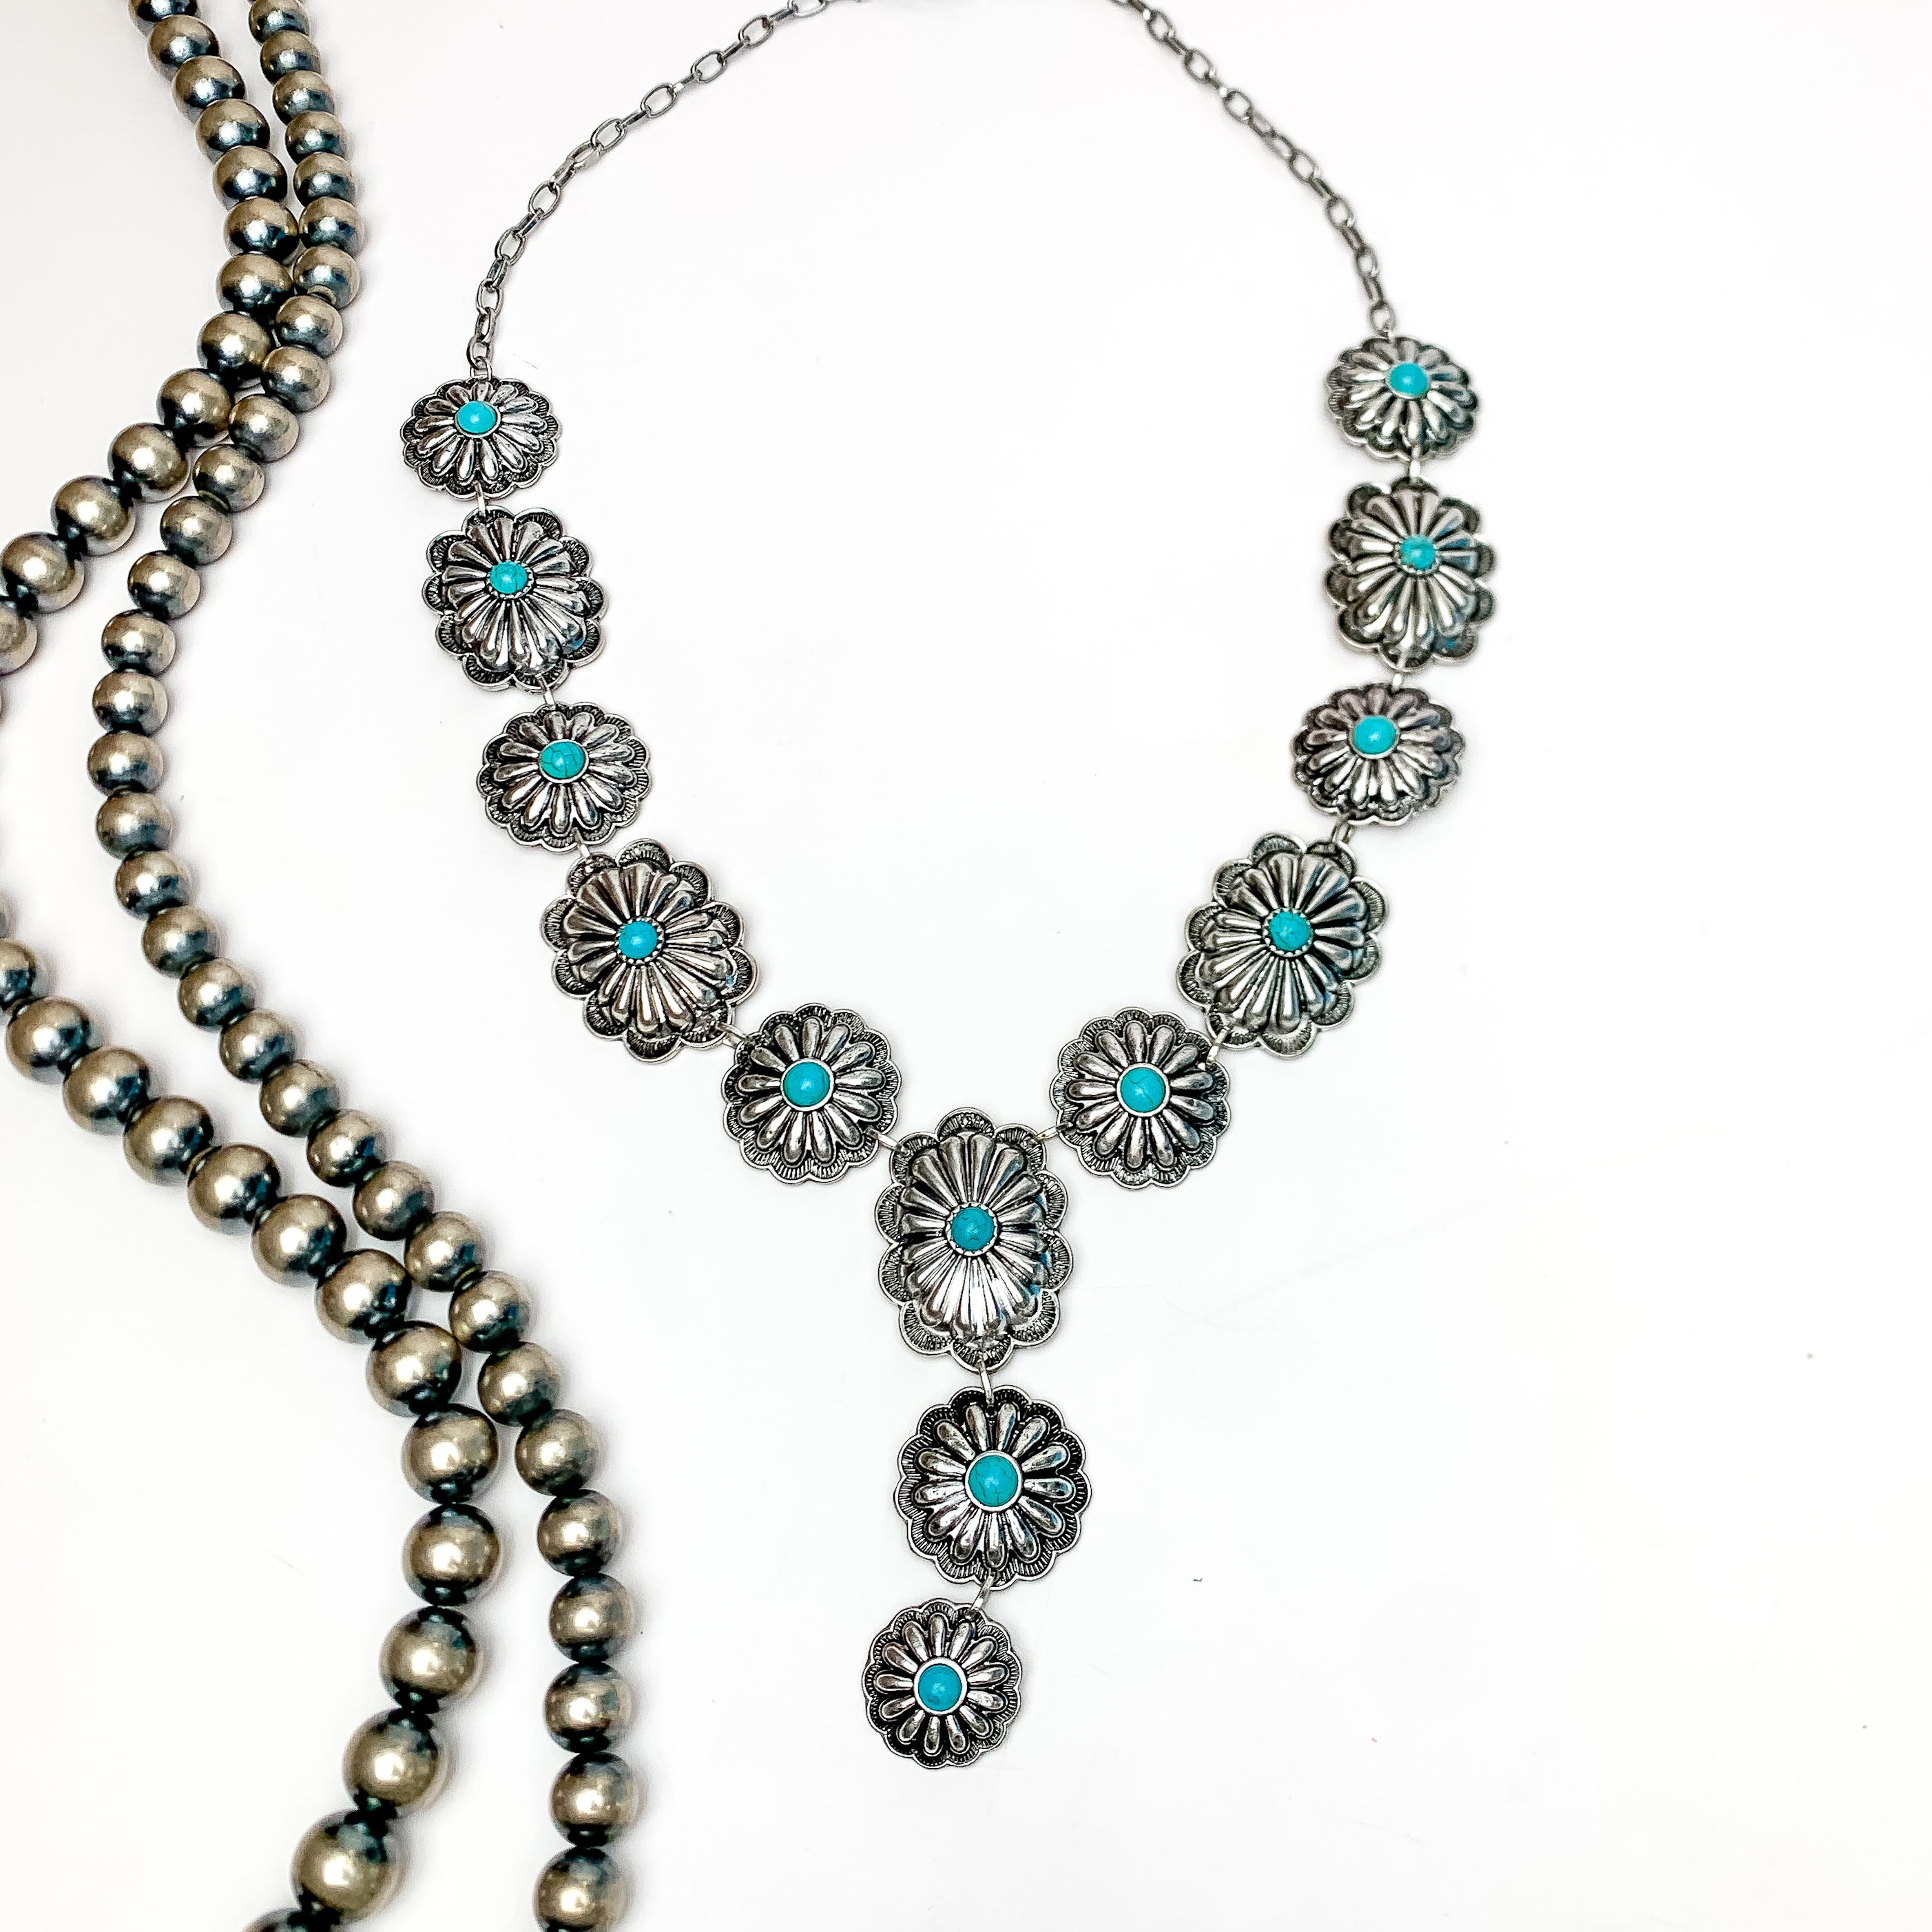 Western Silver Tone Y Necklace With Turquoise Stones - Giddy Up Glamour Boutique